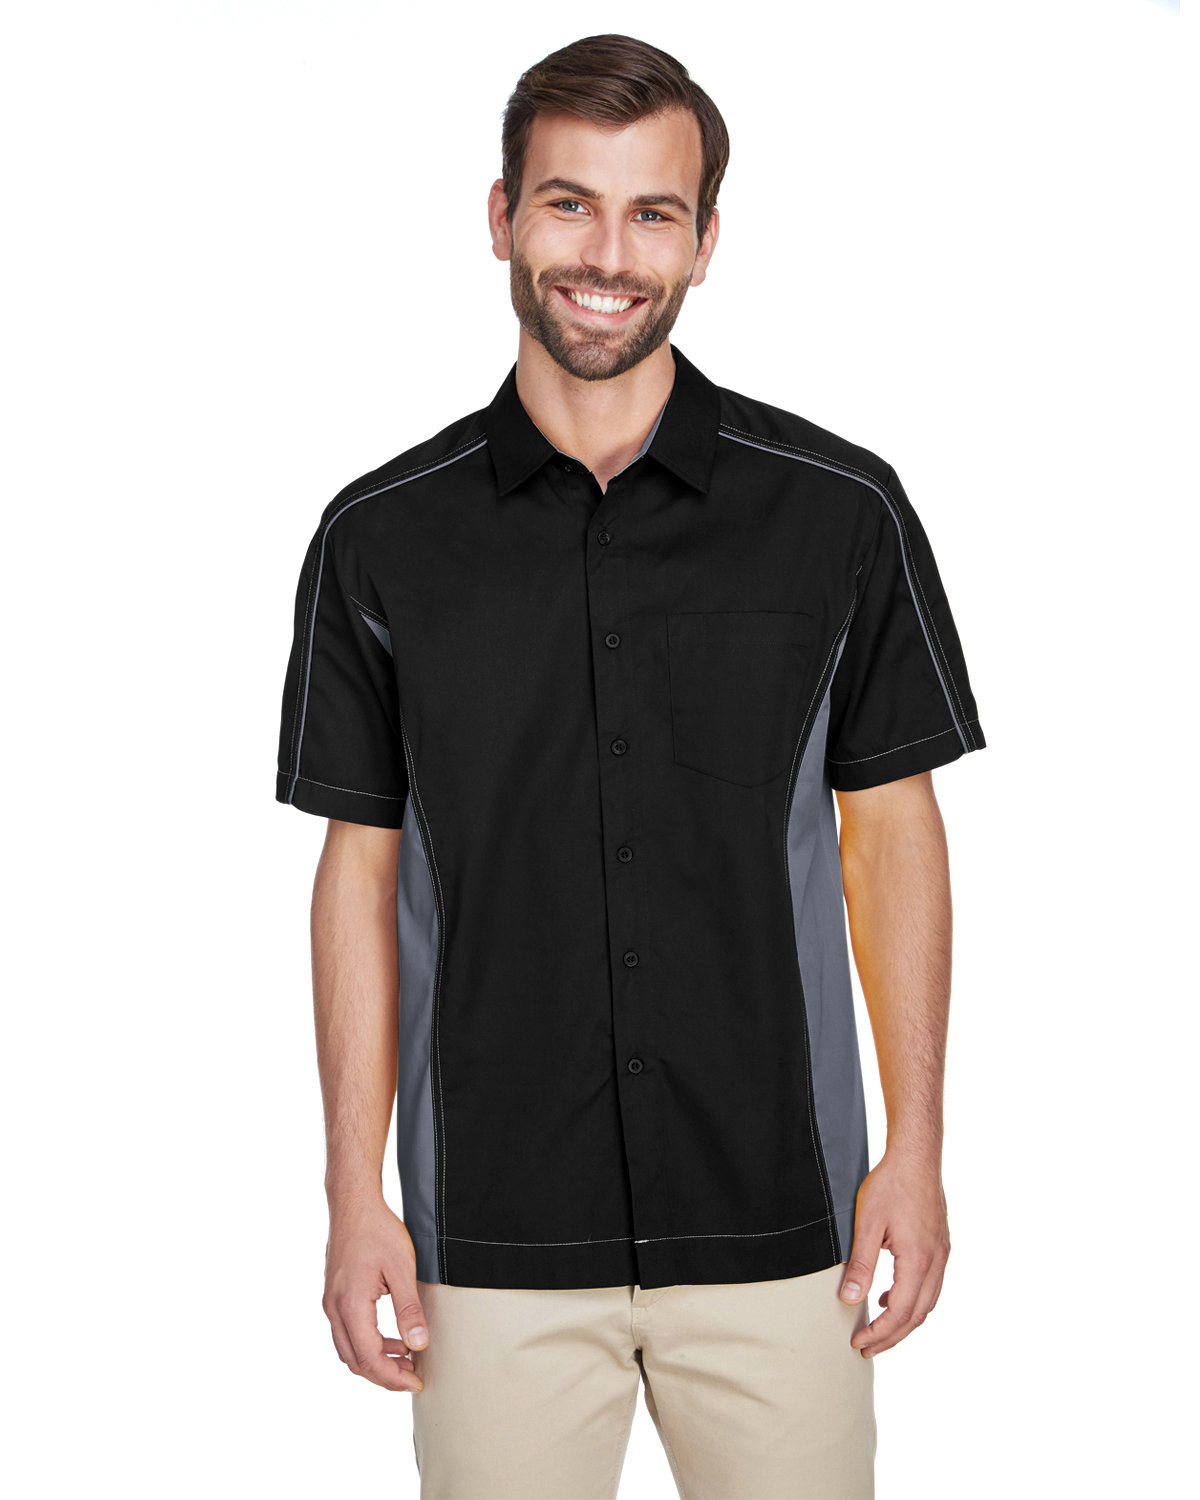 North End 87042 - Men's Fuse Colorblock Twill Shirt $26.60 - Woven ...